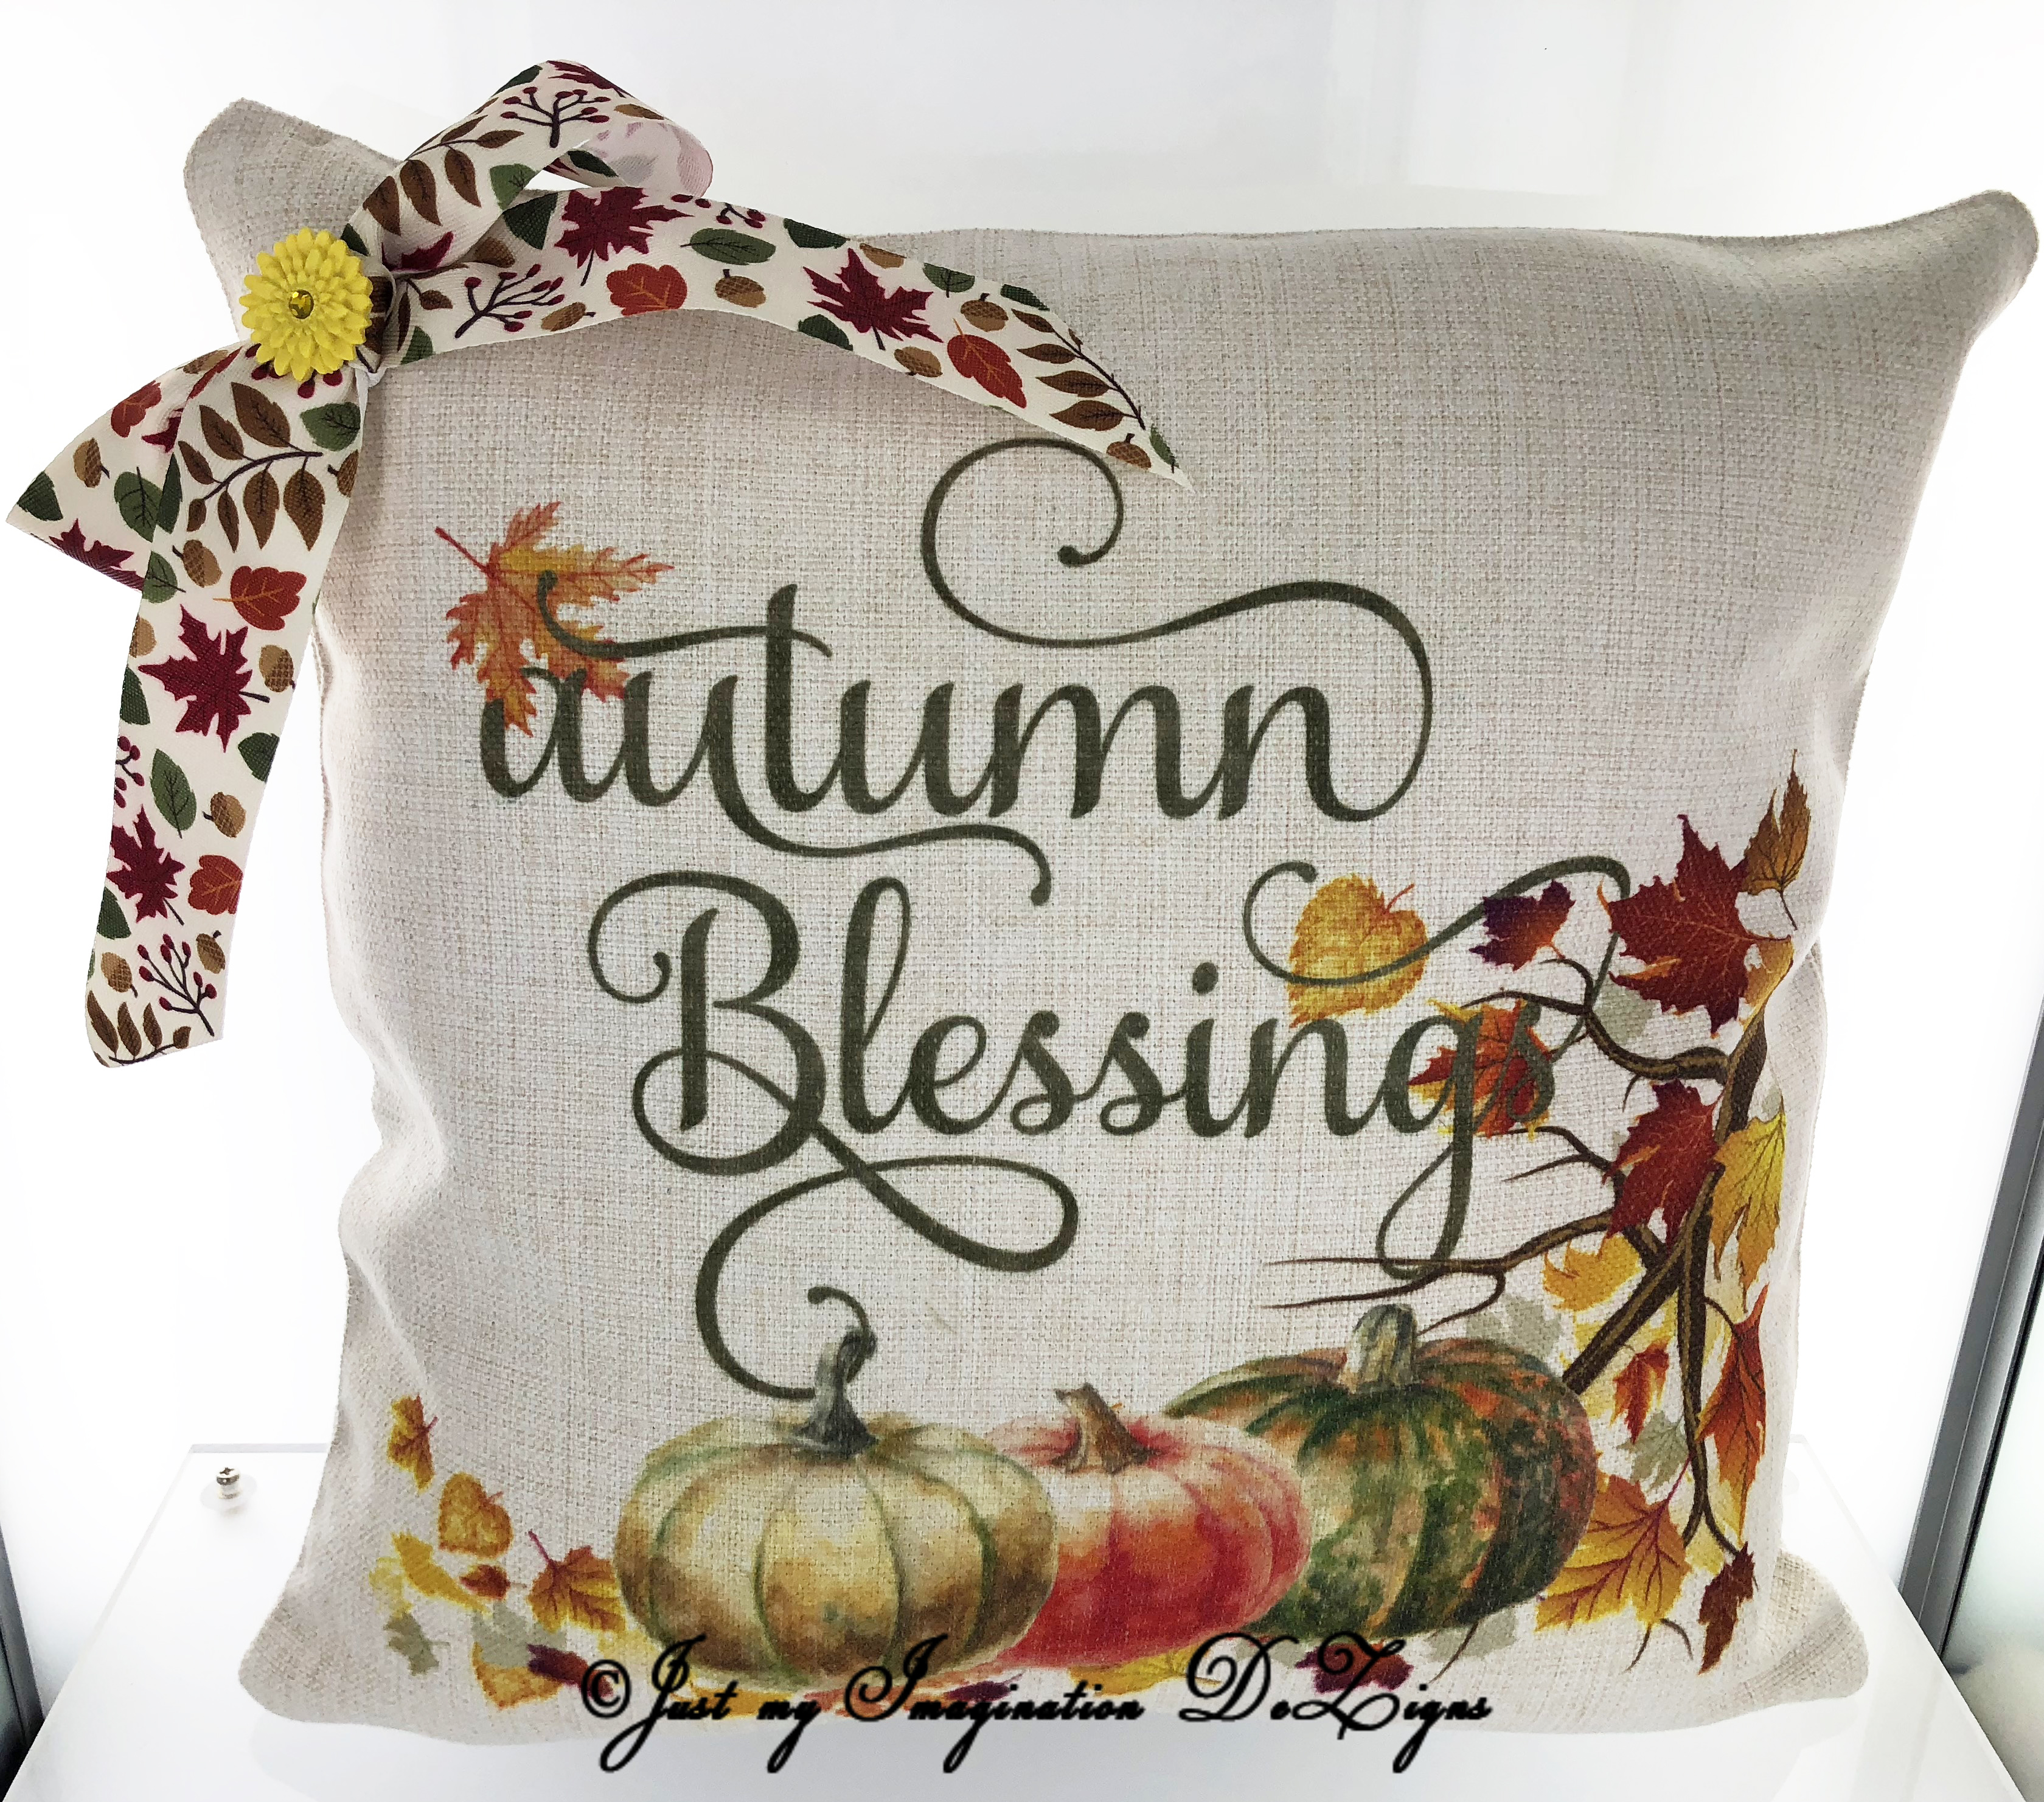 Autumn made with sublimation printing